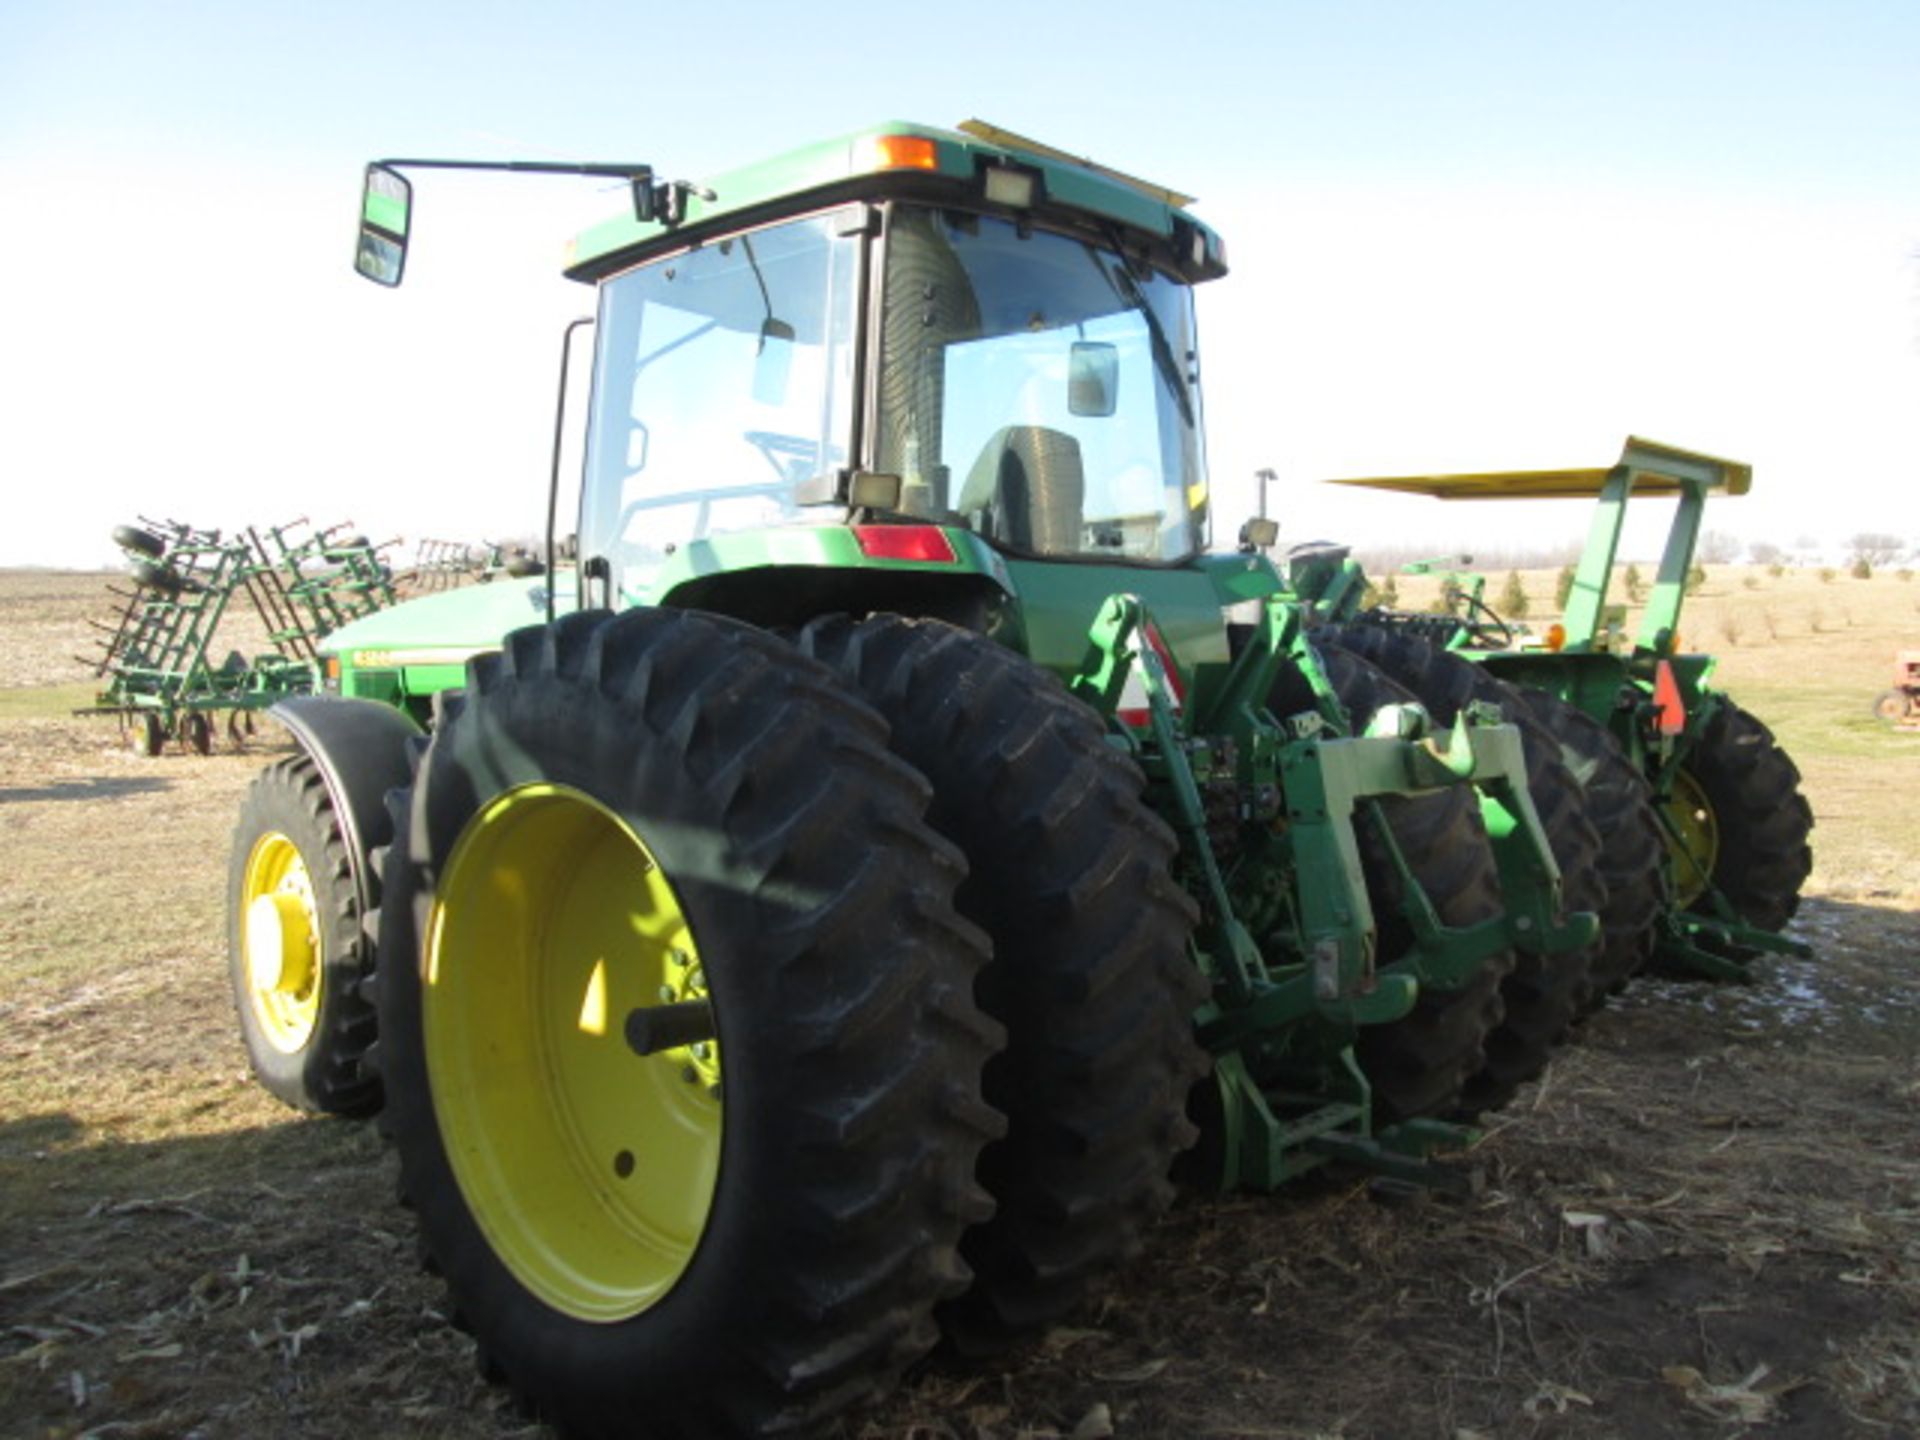 1995 JD 8100MFWD,SN RW8100P003513,18.4X42 DUALS,3 HYDR, 3235 HRS. - Image 4 of 17